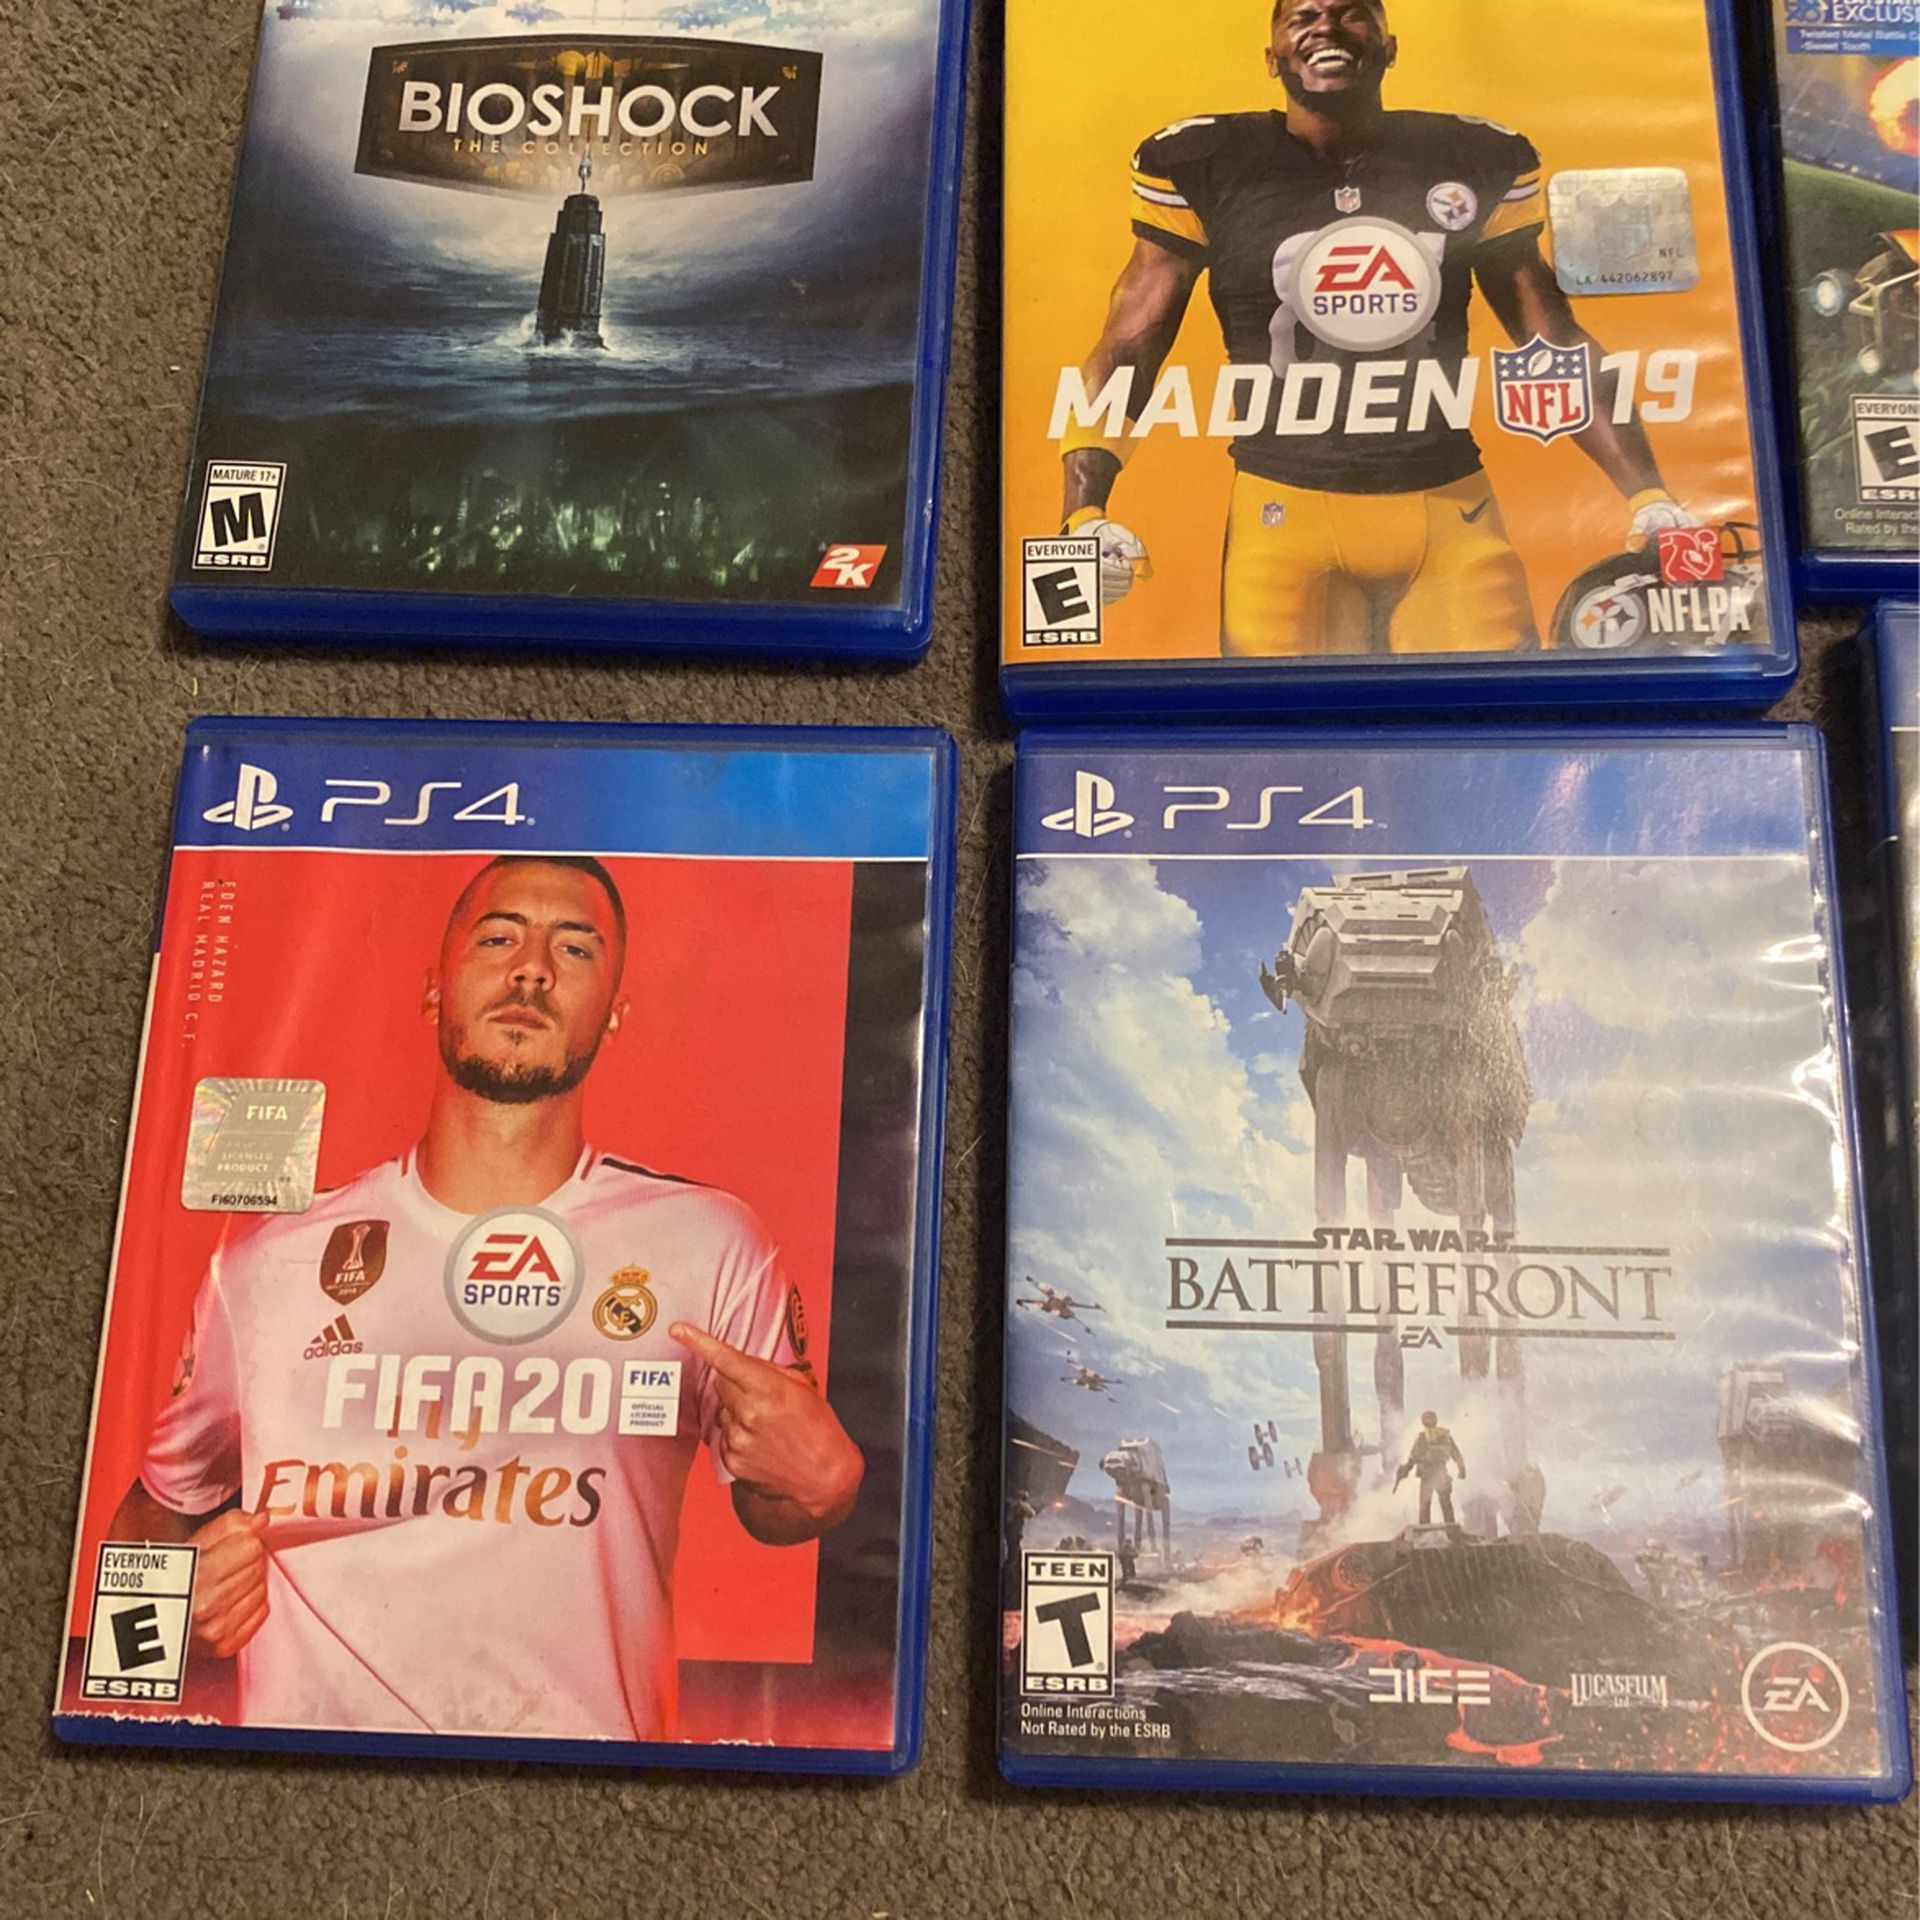 6 PS4 Games and 1 Xbox 360 Game (playable on Xbox One And Series X)